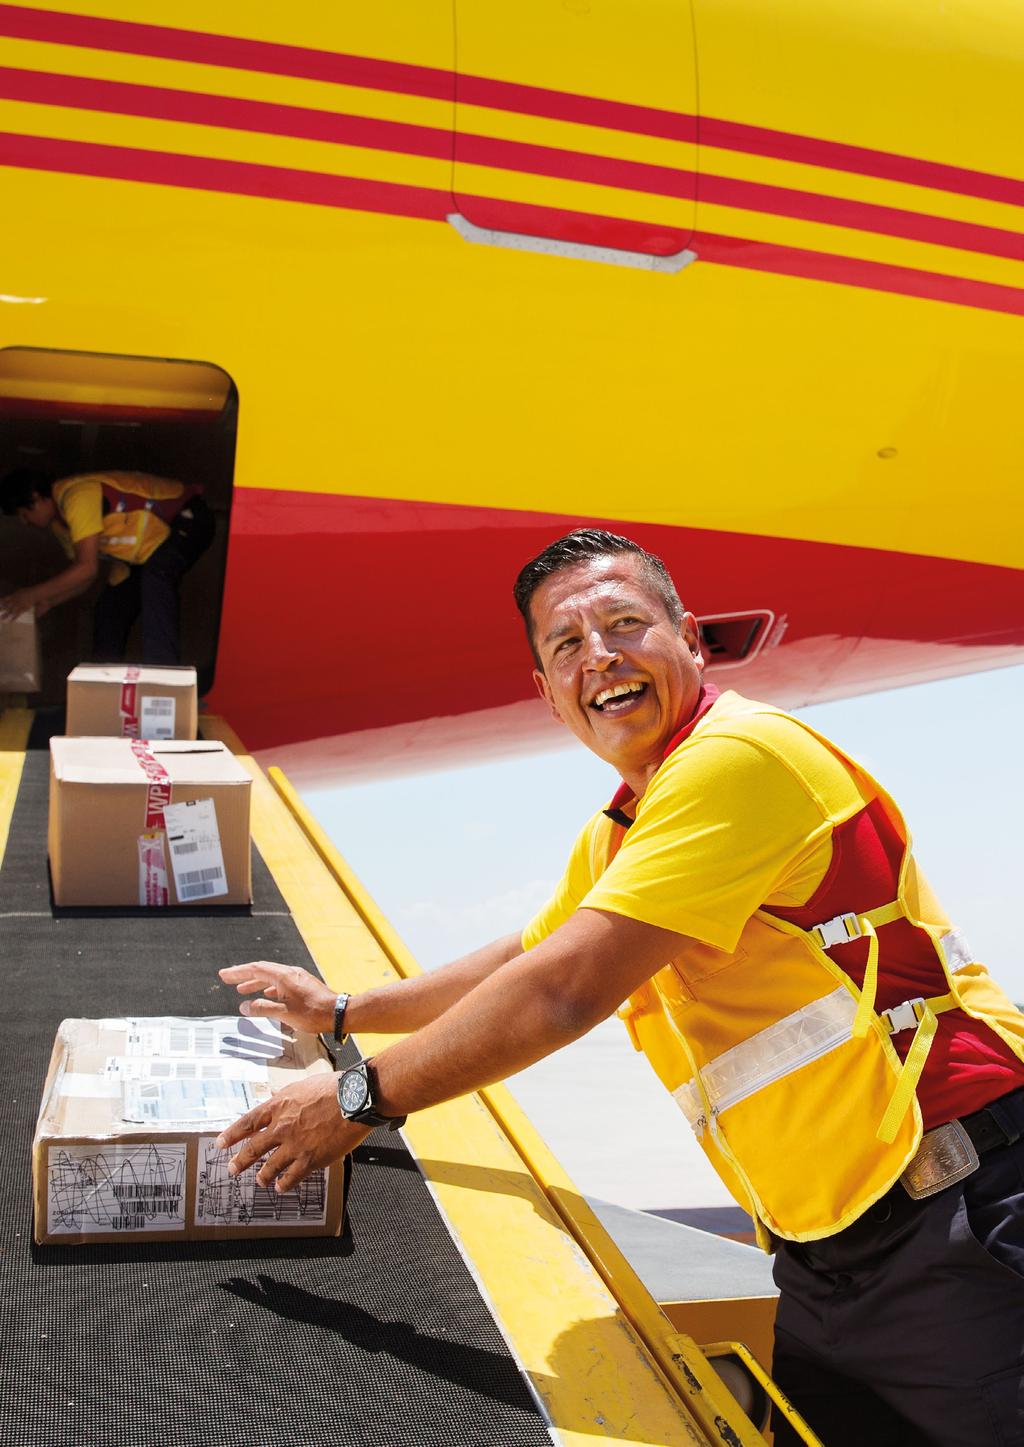 DHL Express Excellence.